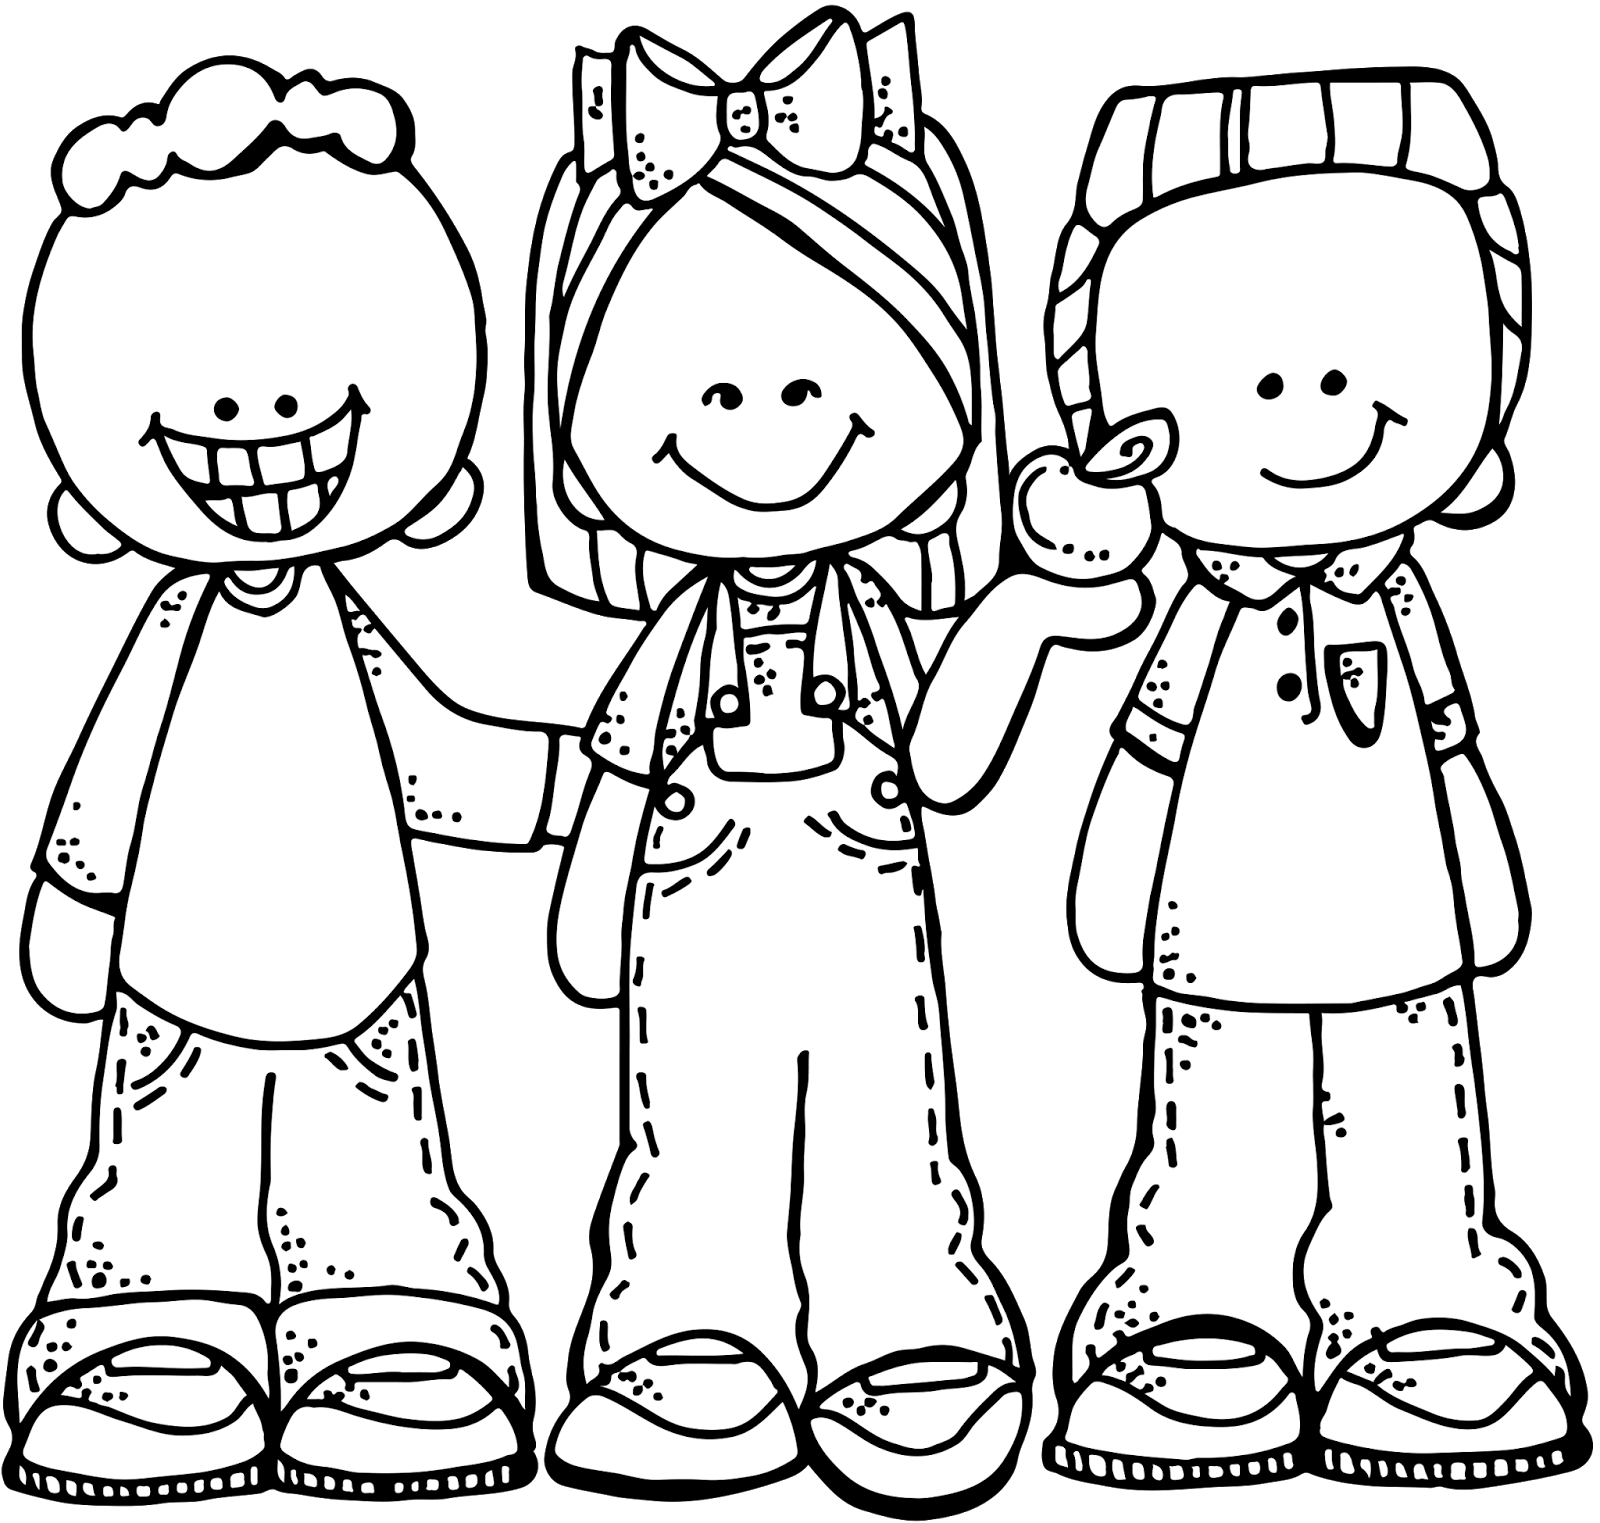 Group clipart black and white, Group black and white